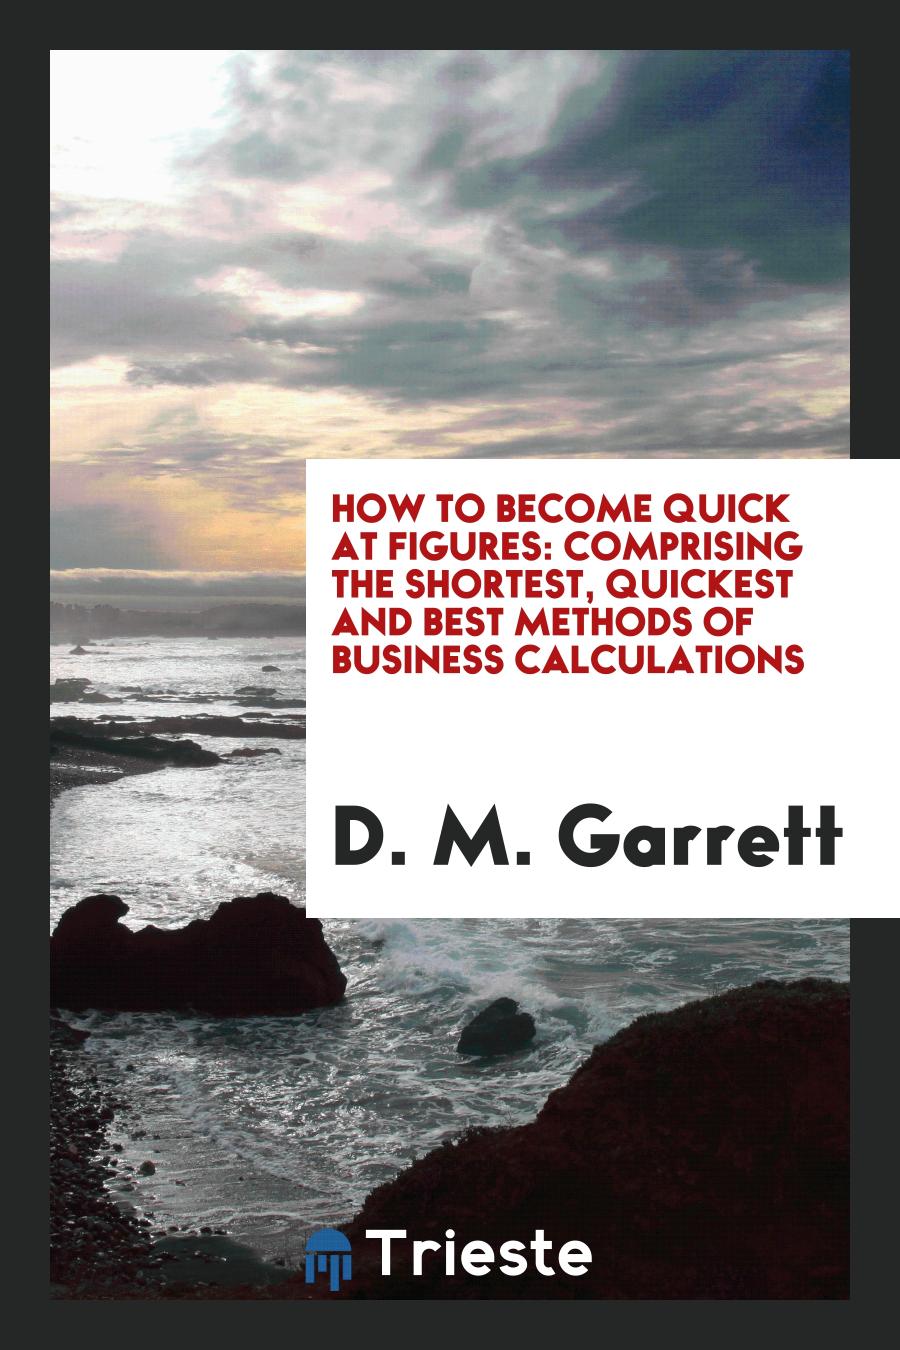 How to Become Quick at Figures: Comprising the Shortest, Quickest and Best Methods of Business Calculations